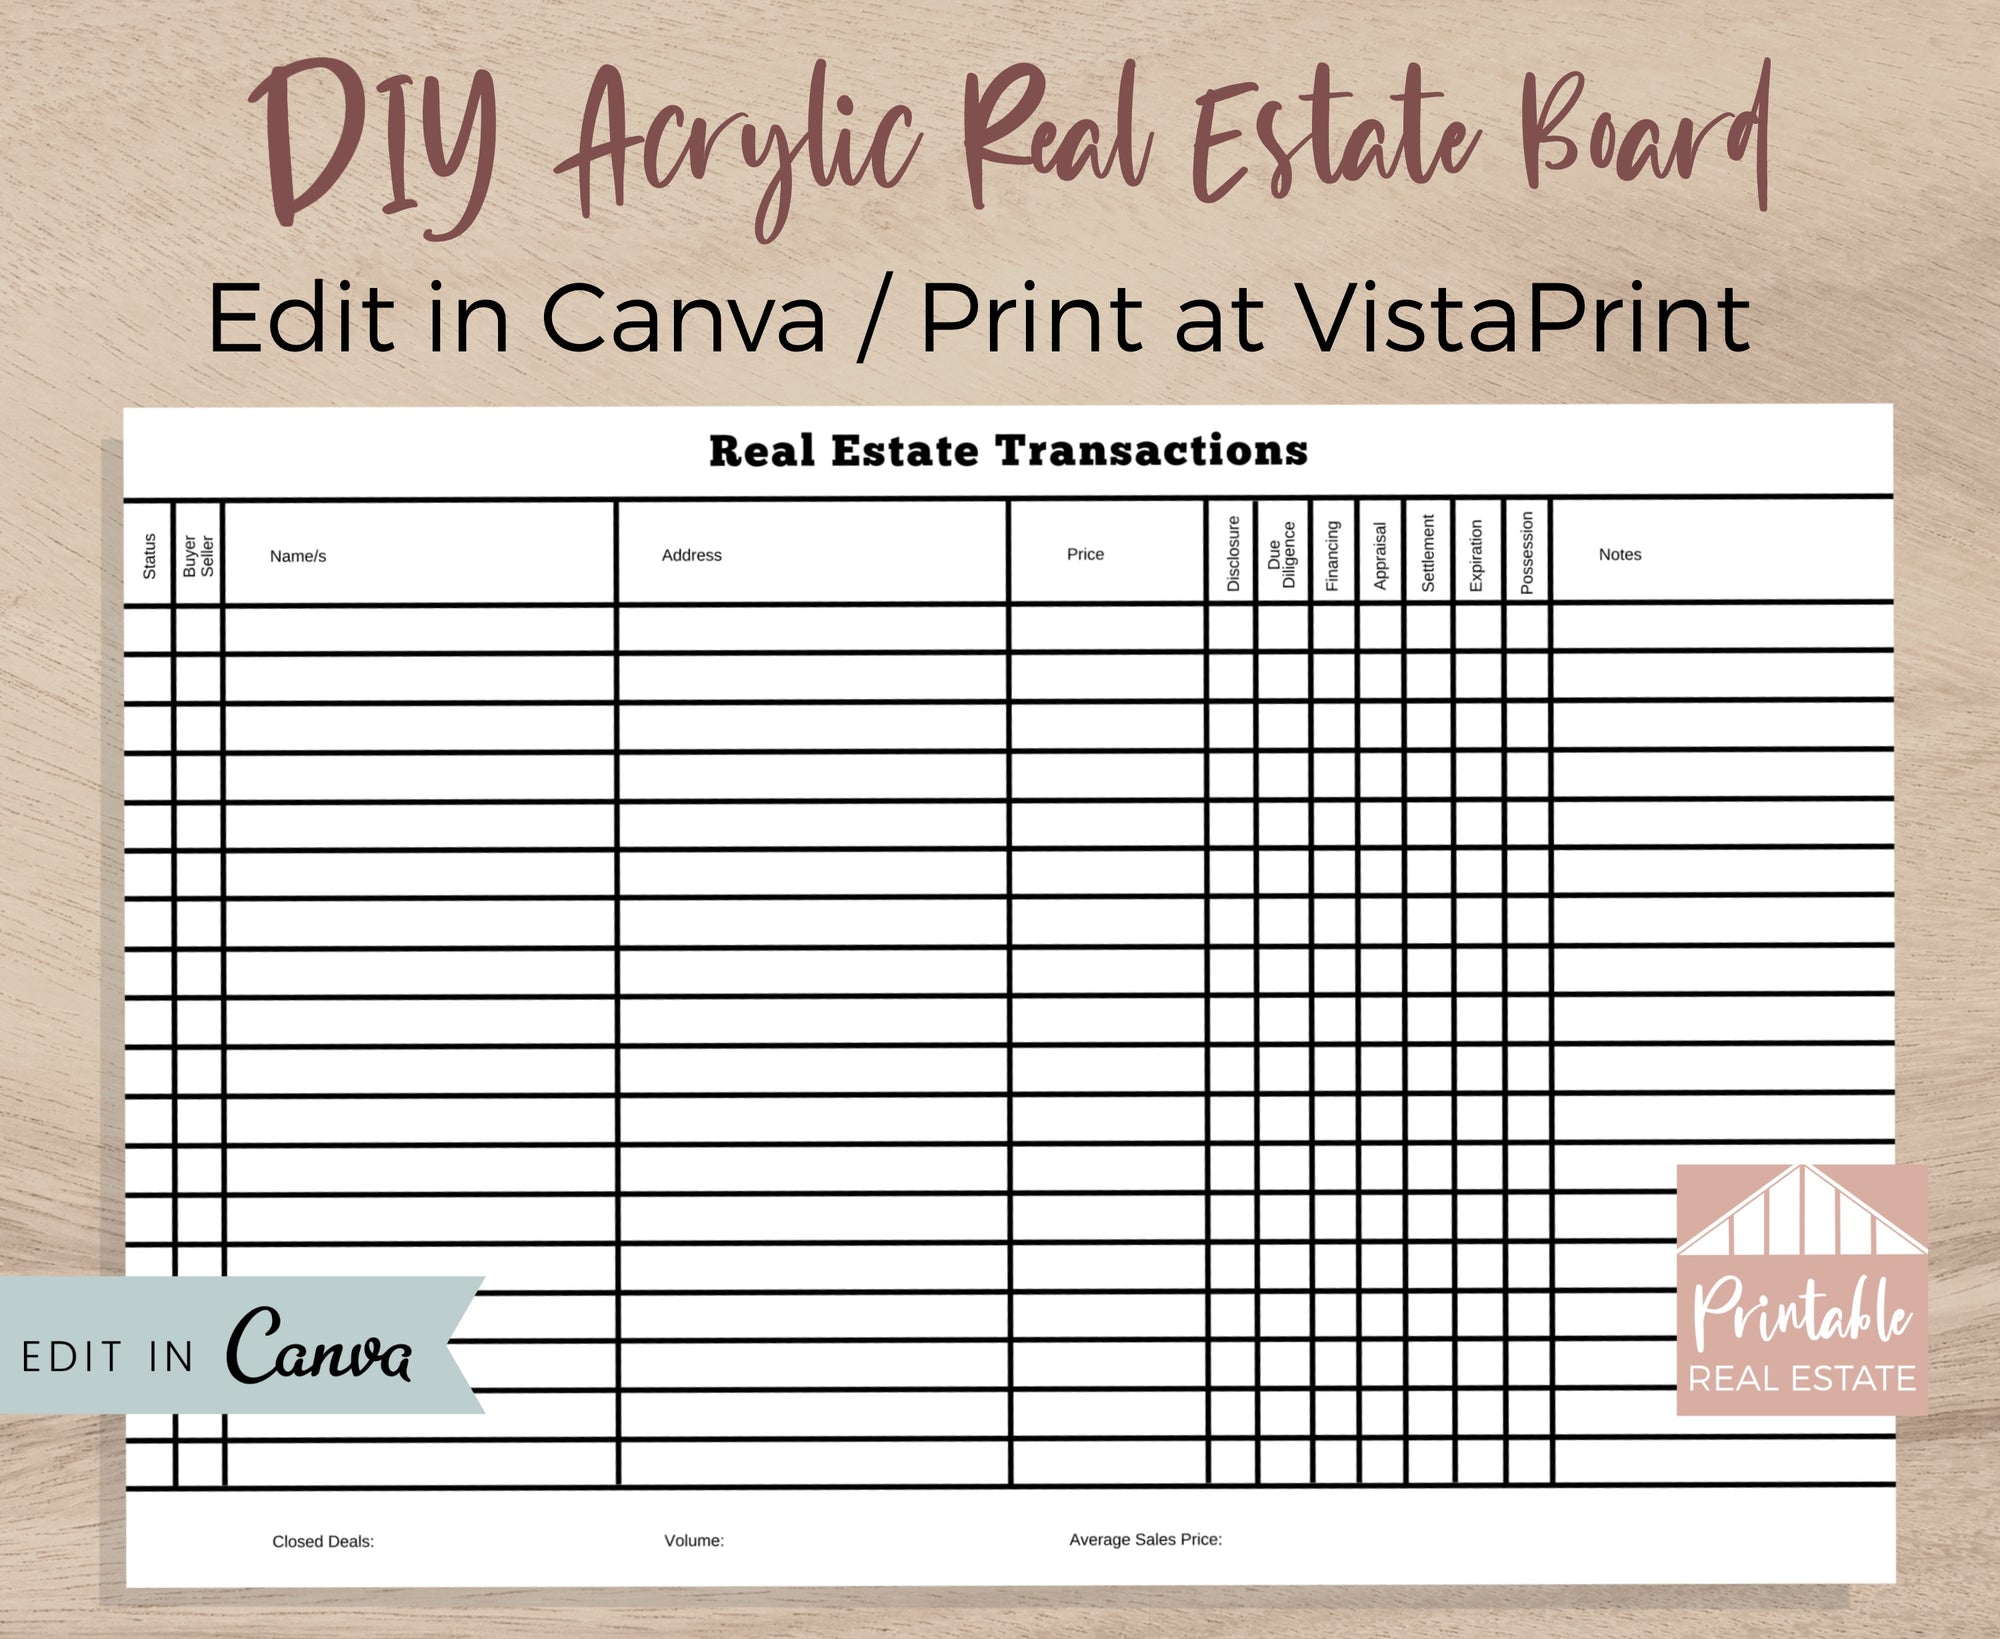 Acrylic Real Estate Transaction Pipeline Board, DIY Editable Canva Template & print with VistaPrint